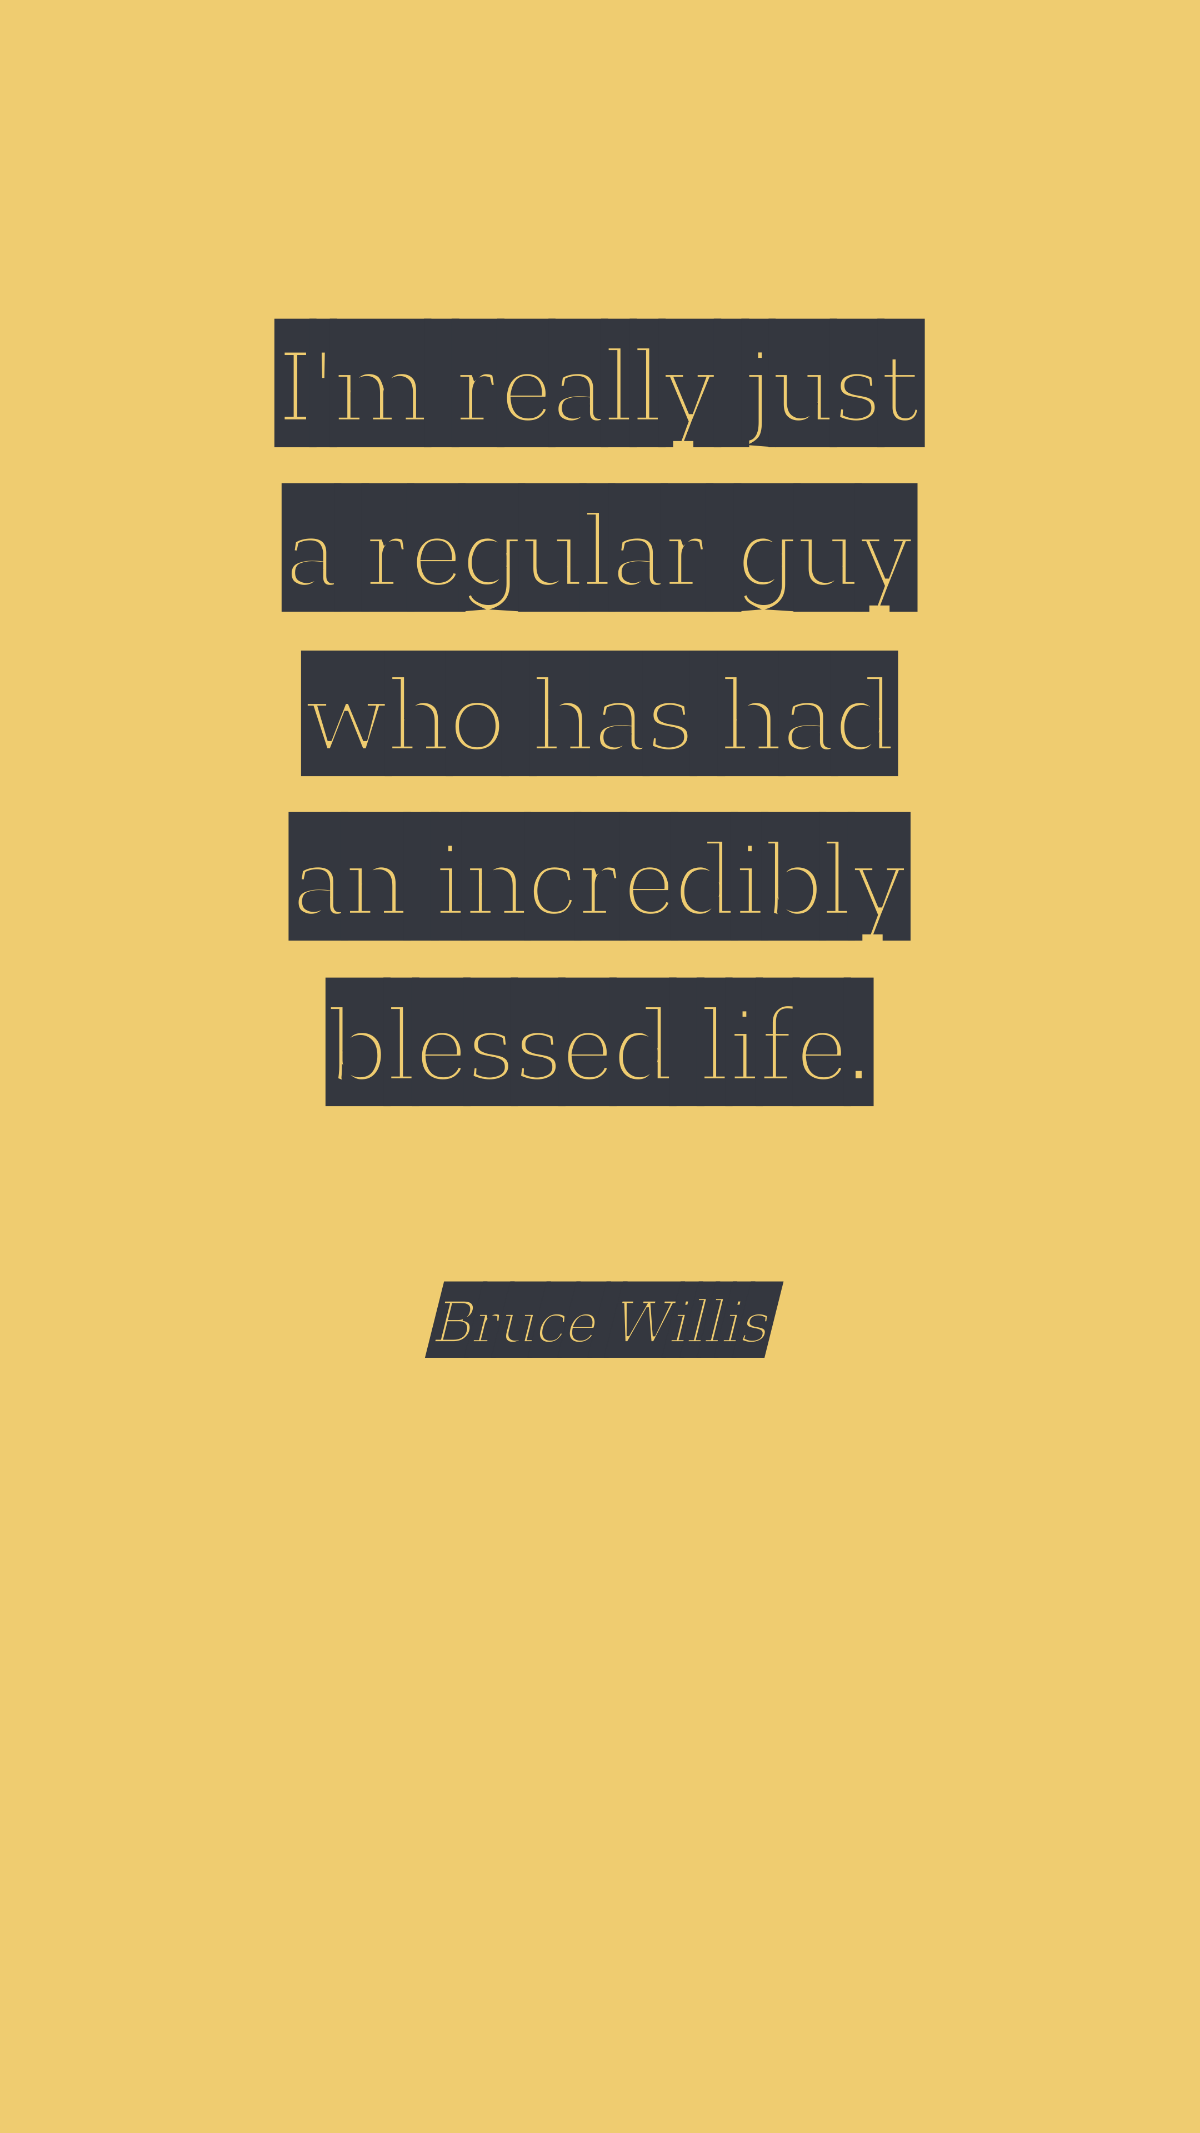 Bruce Willis - I'm really just a regular guy who has had an incredibly blessed life.